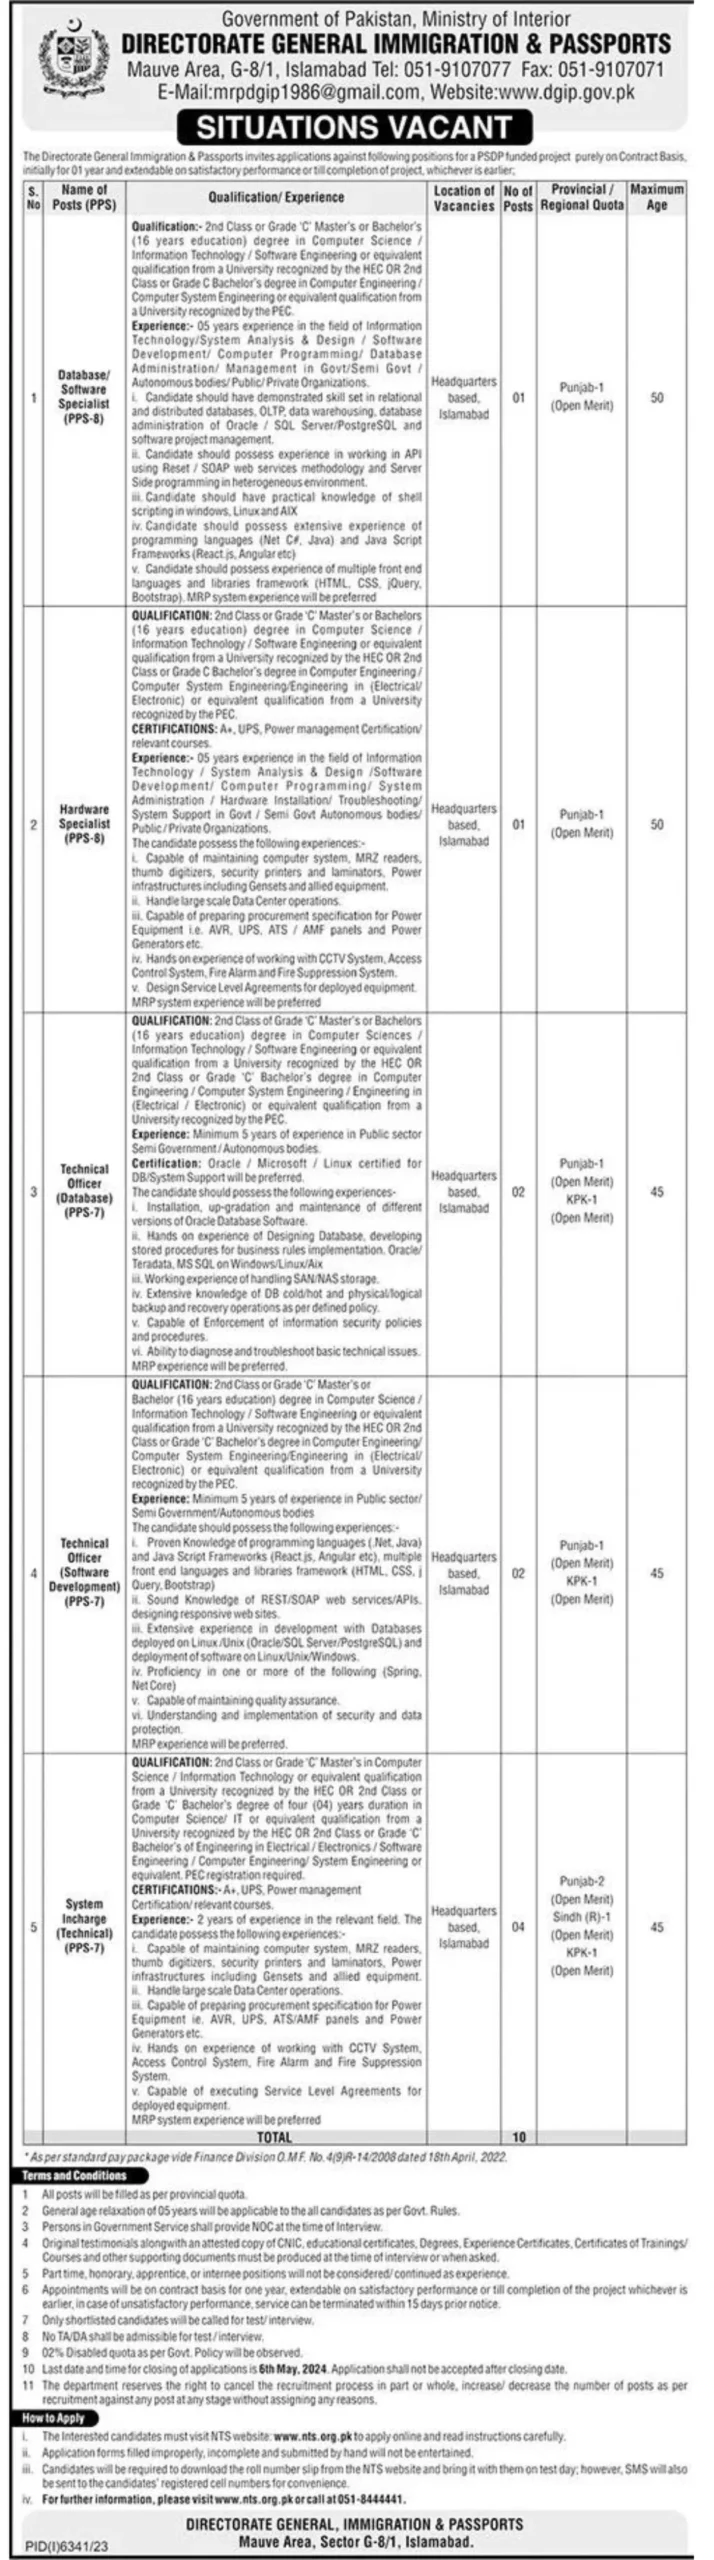 Directorate General of Immigration and Passports DGIP Jobs